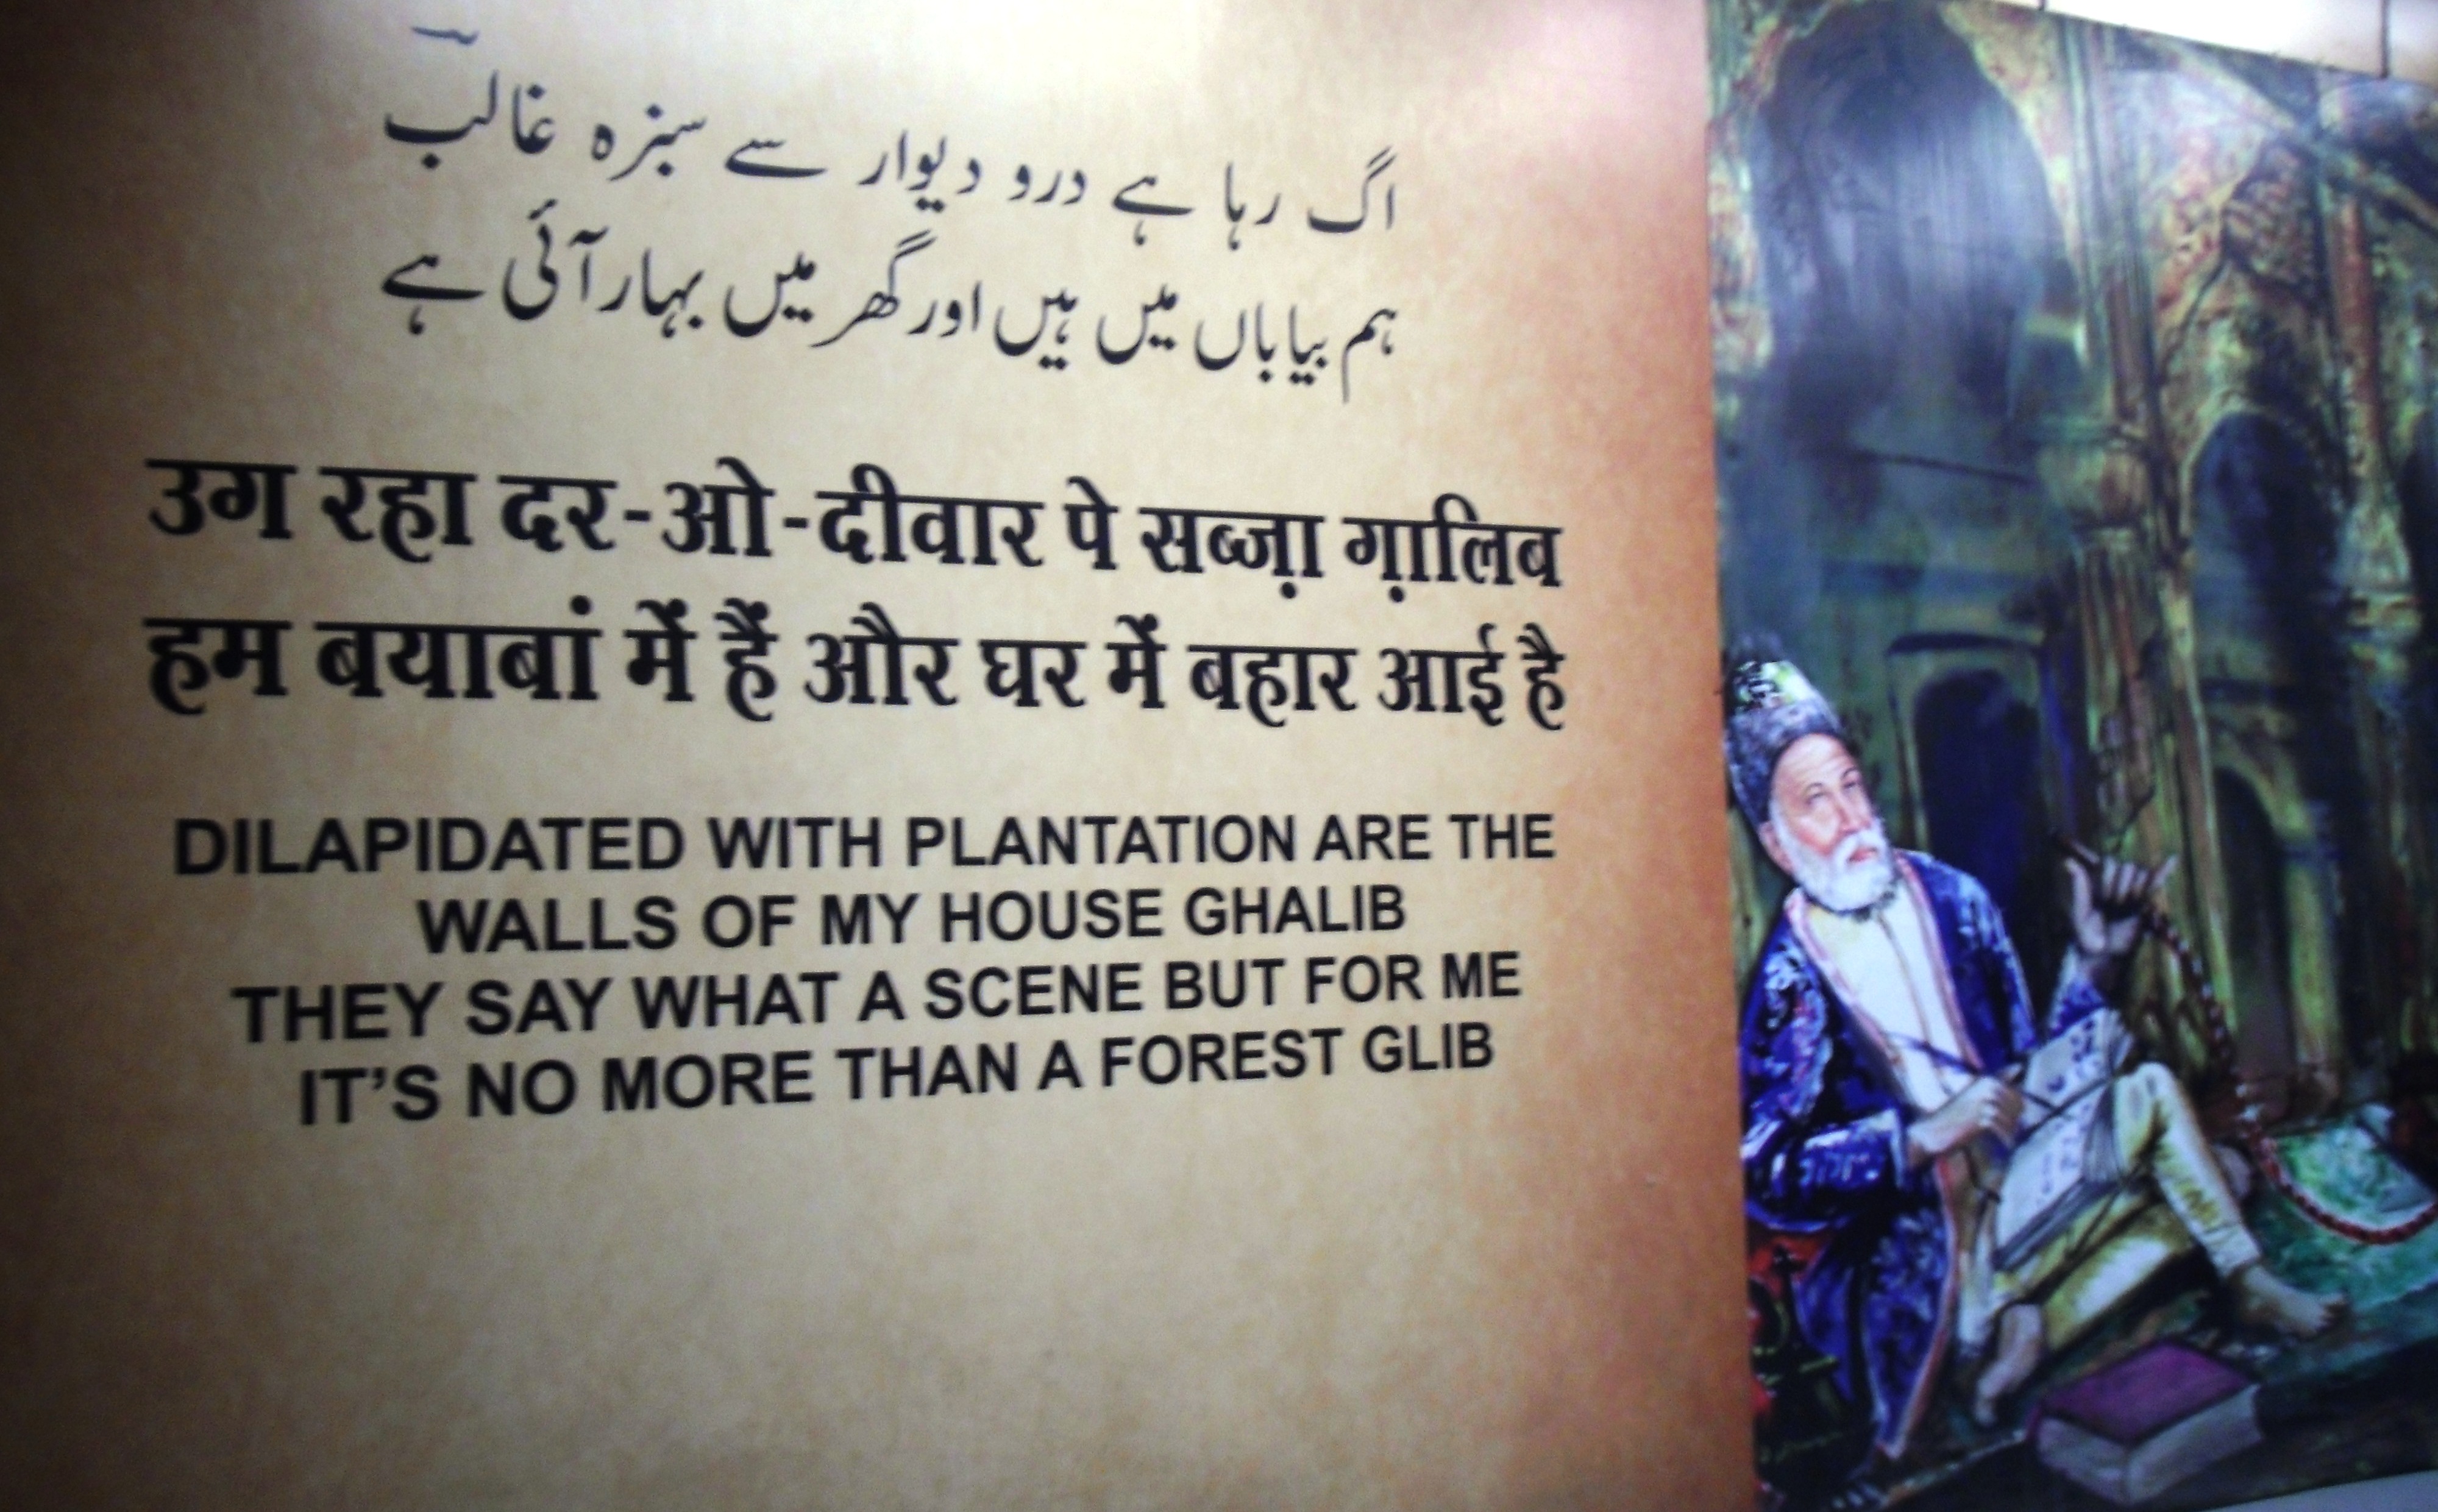 Letter from Ballimaran - On My Final Home, By Poet Mirza Ghalib